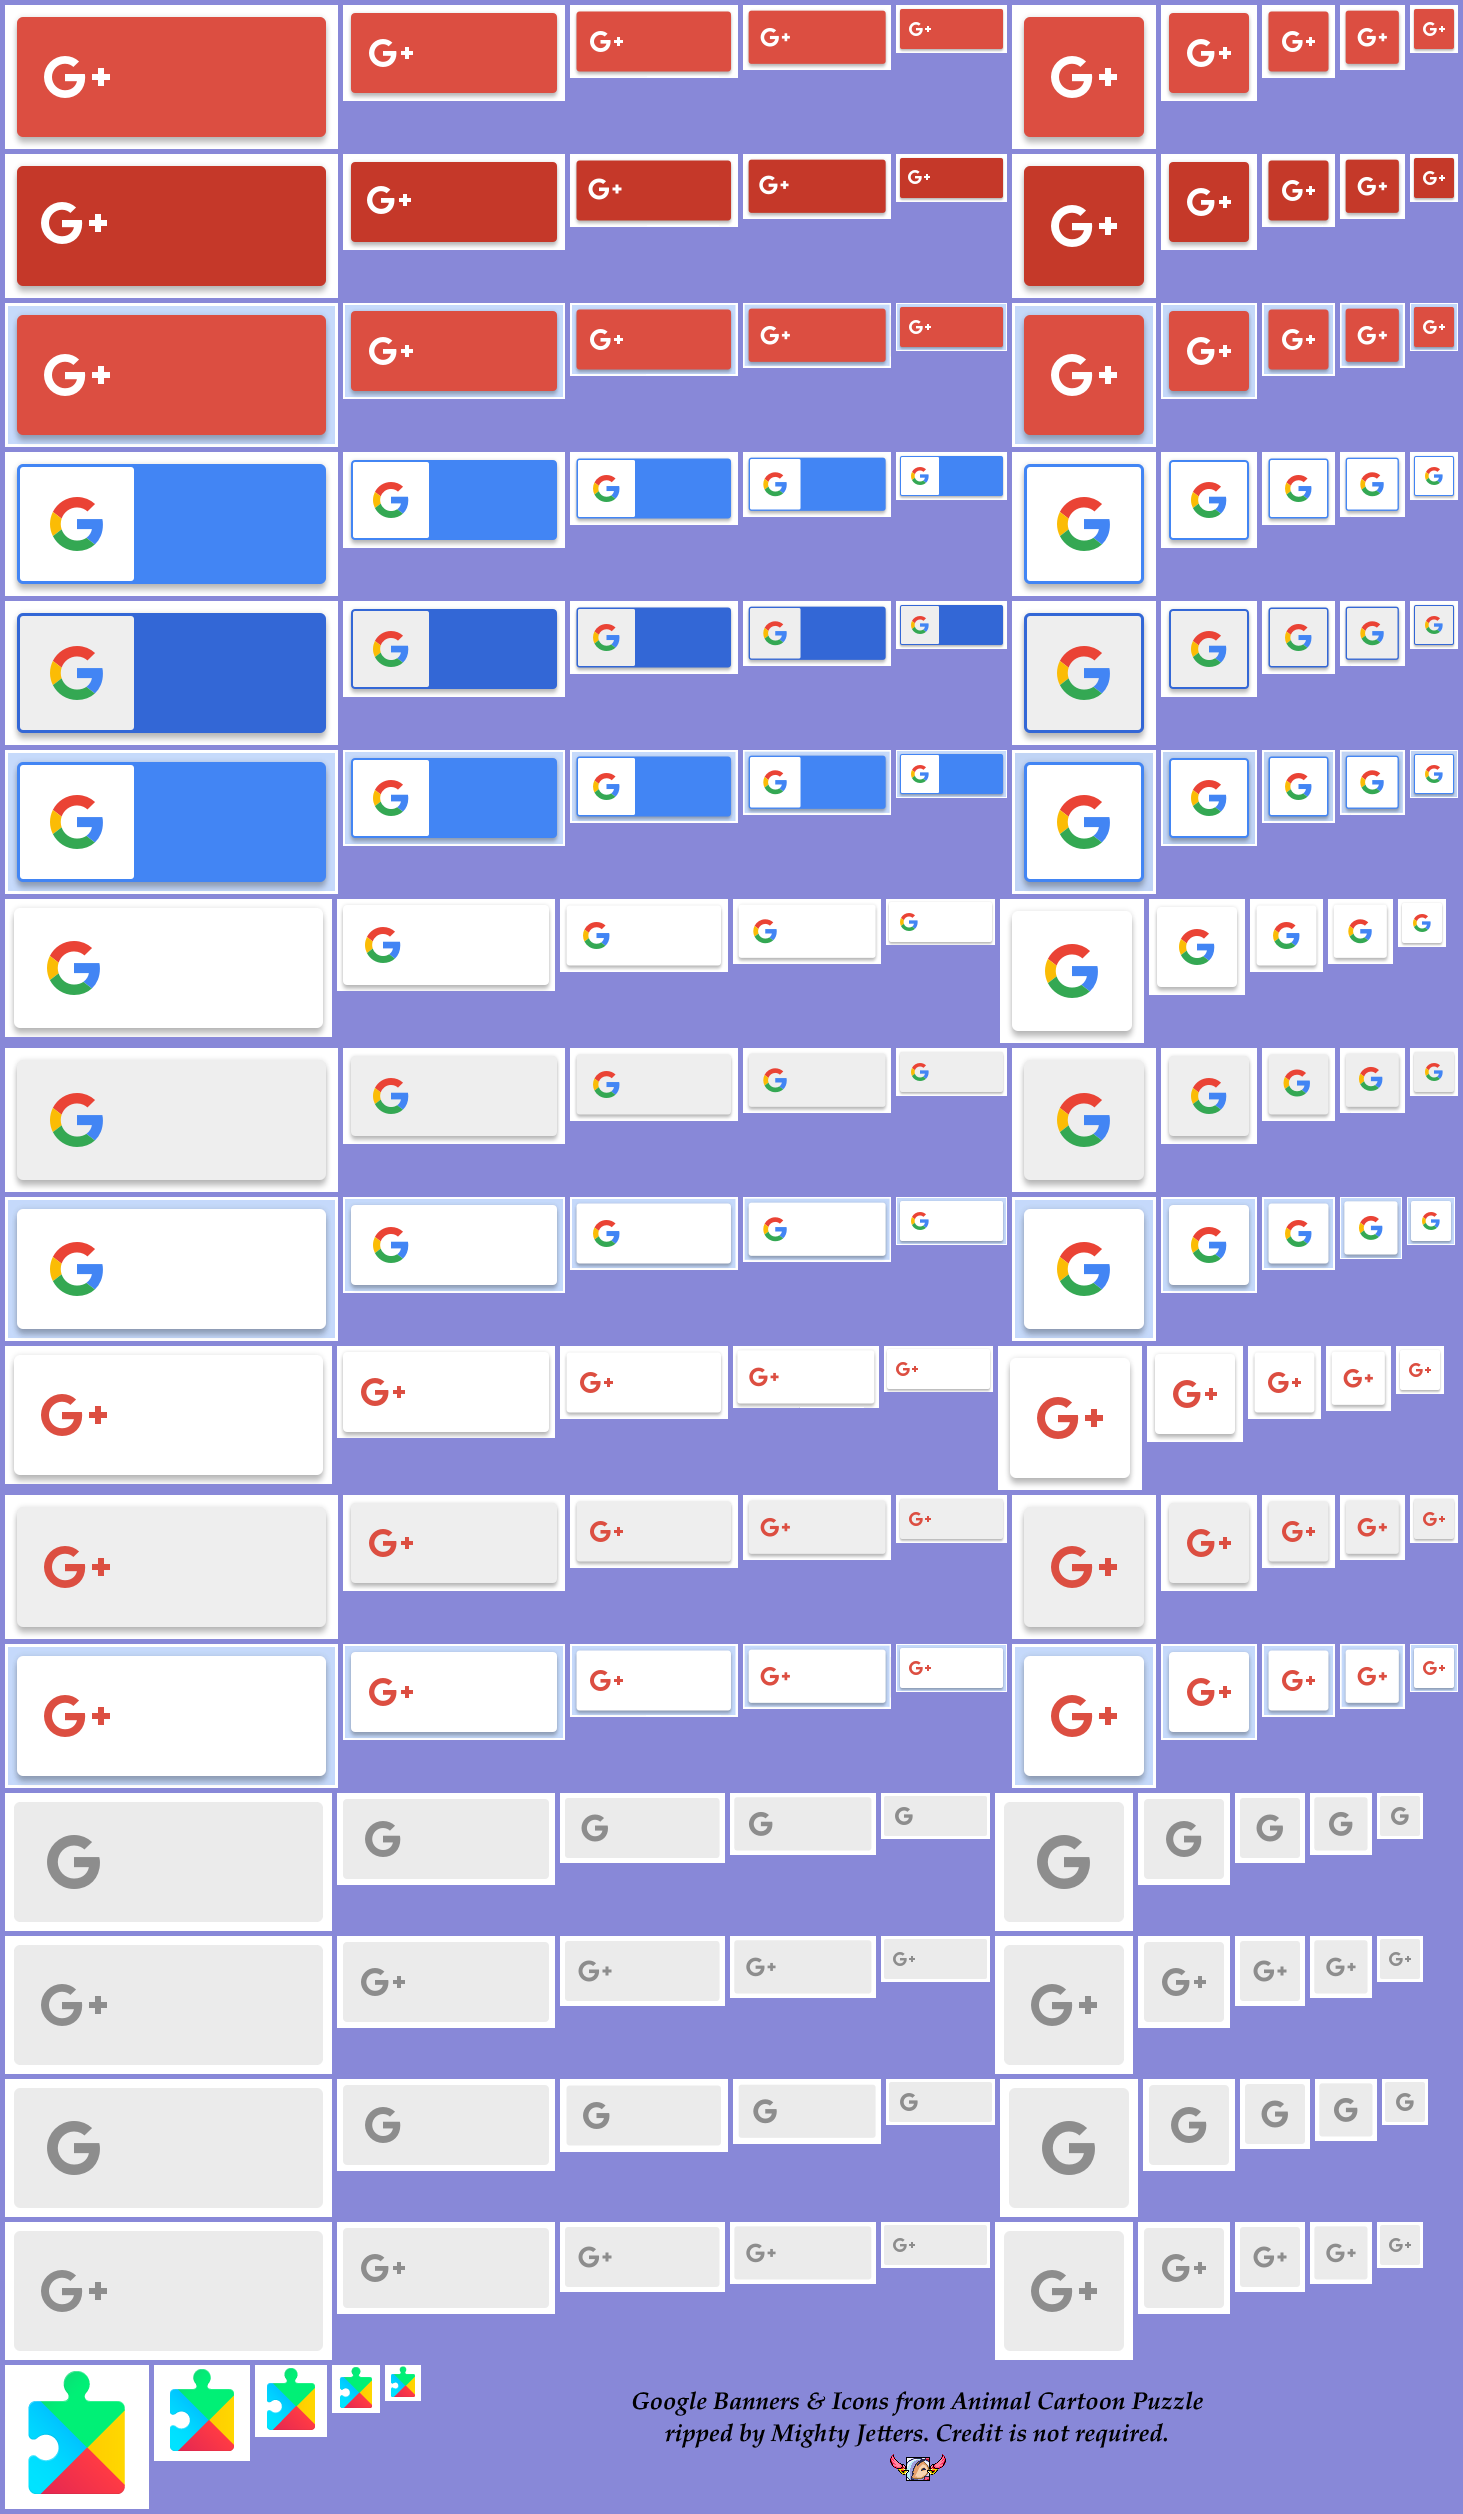 Google Banners & Icons